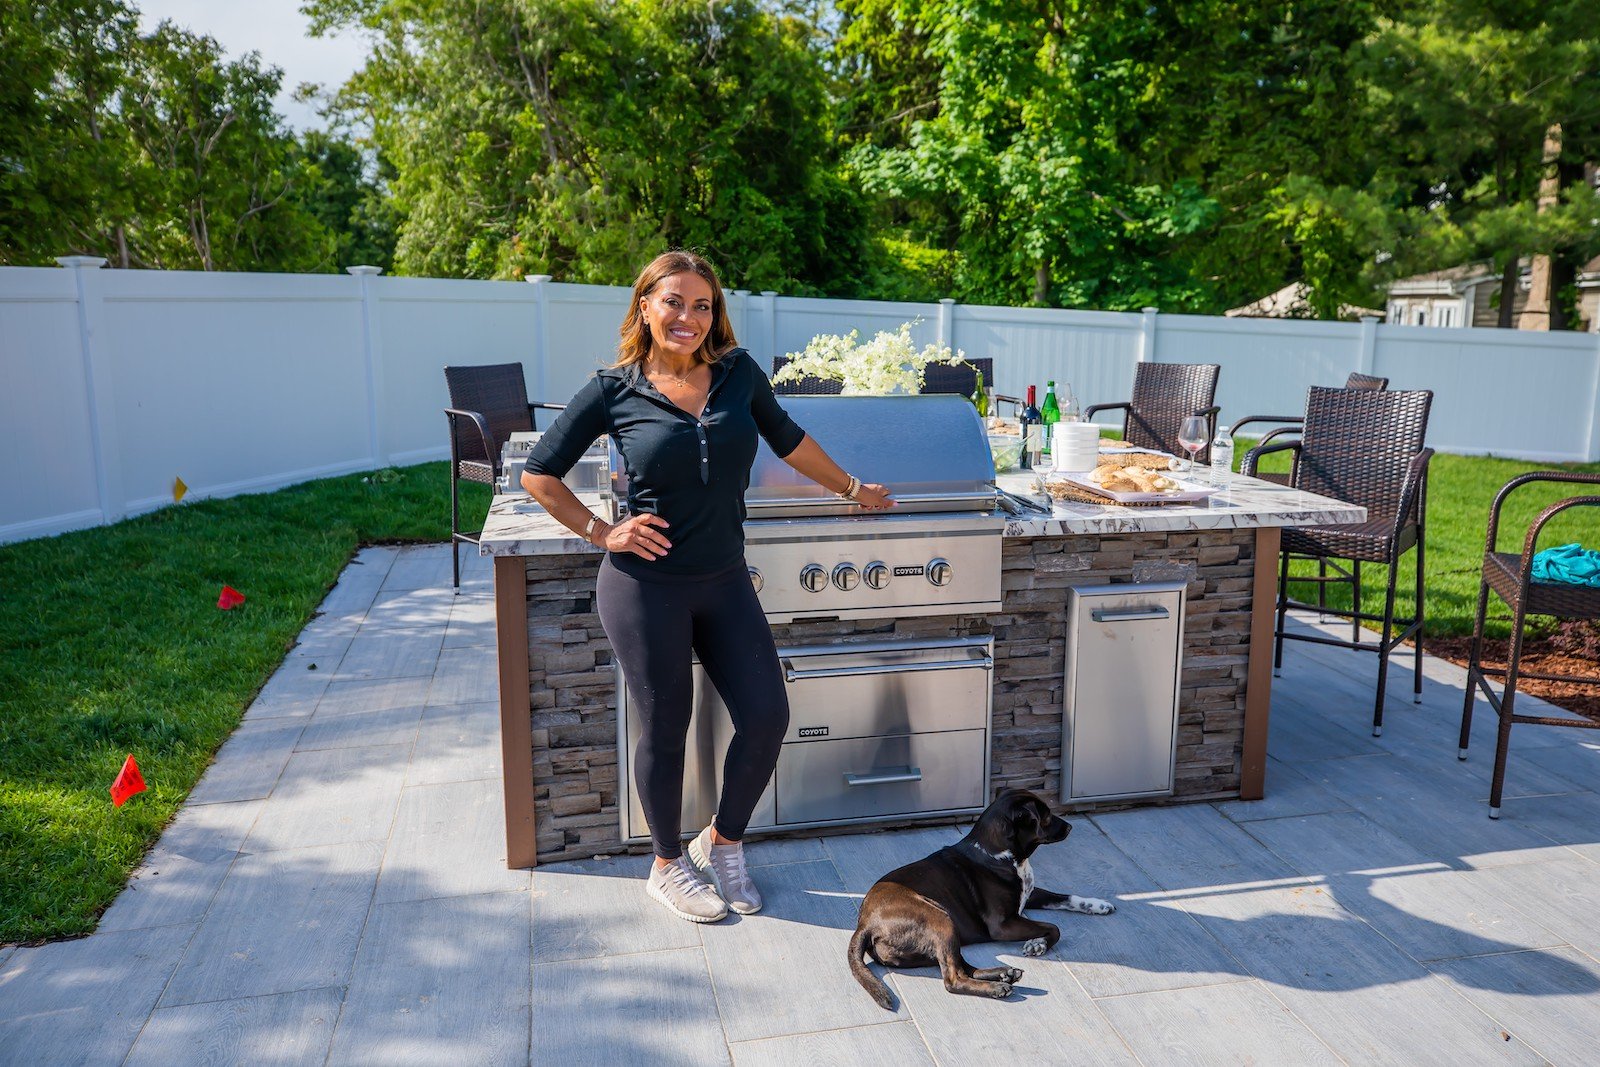 ‘RHONJ’: Dolores Catania Loves Her Dream Outdoor Kitchen – ‘I Put a Little Italian Flair Into It’  [Exclusive]